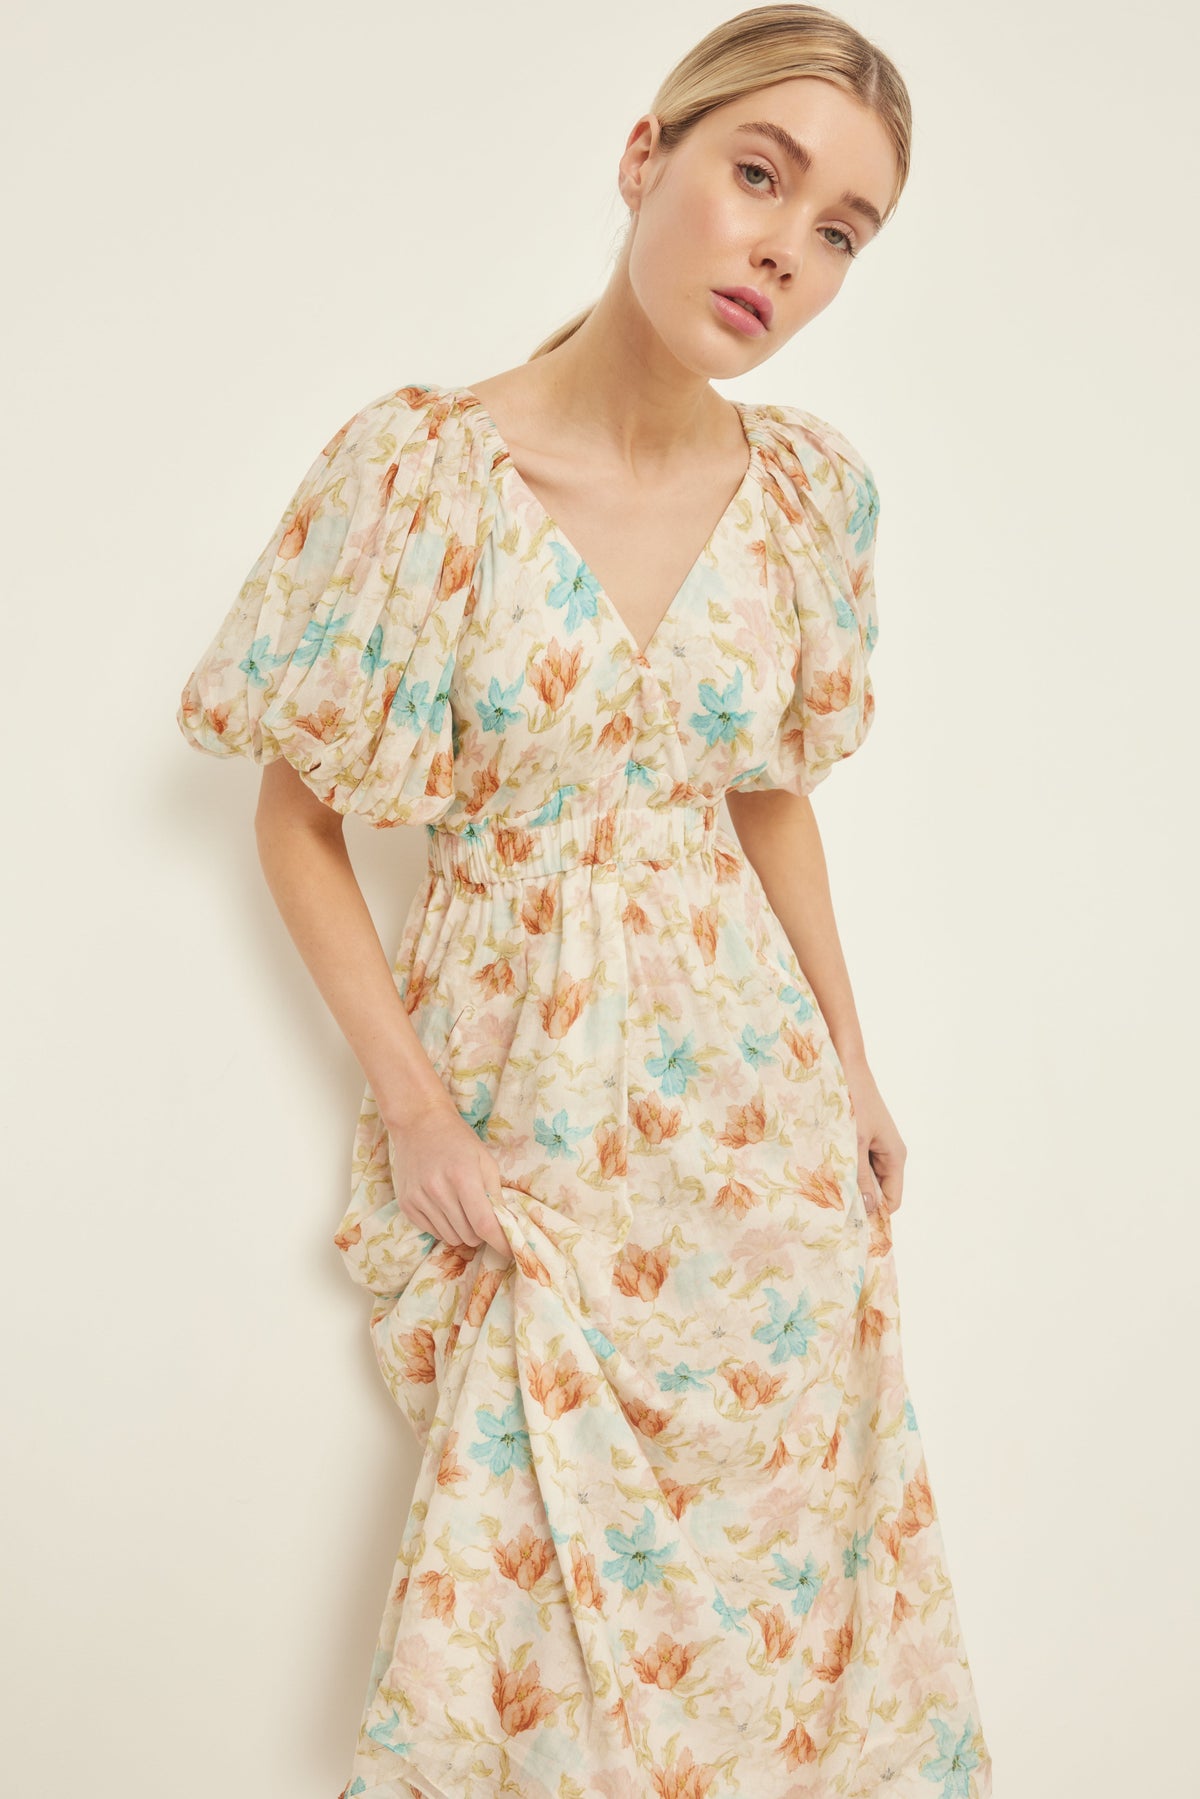 floral toile print midi dress for summer with puffed sleeves